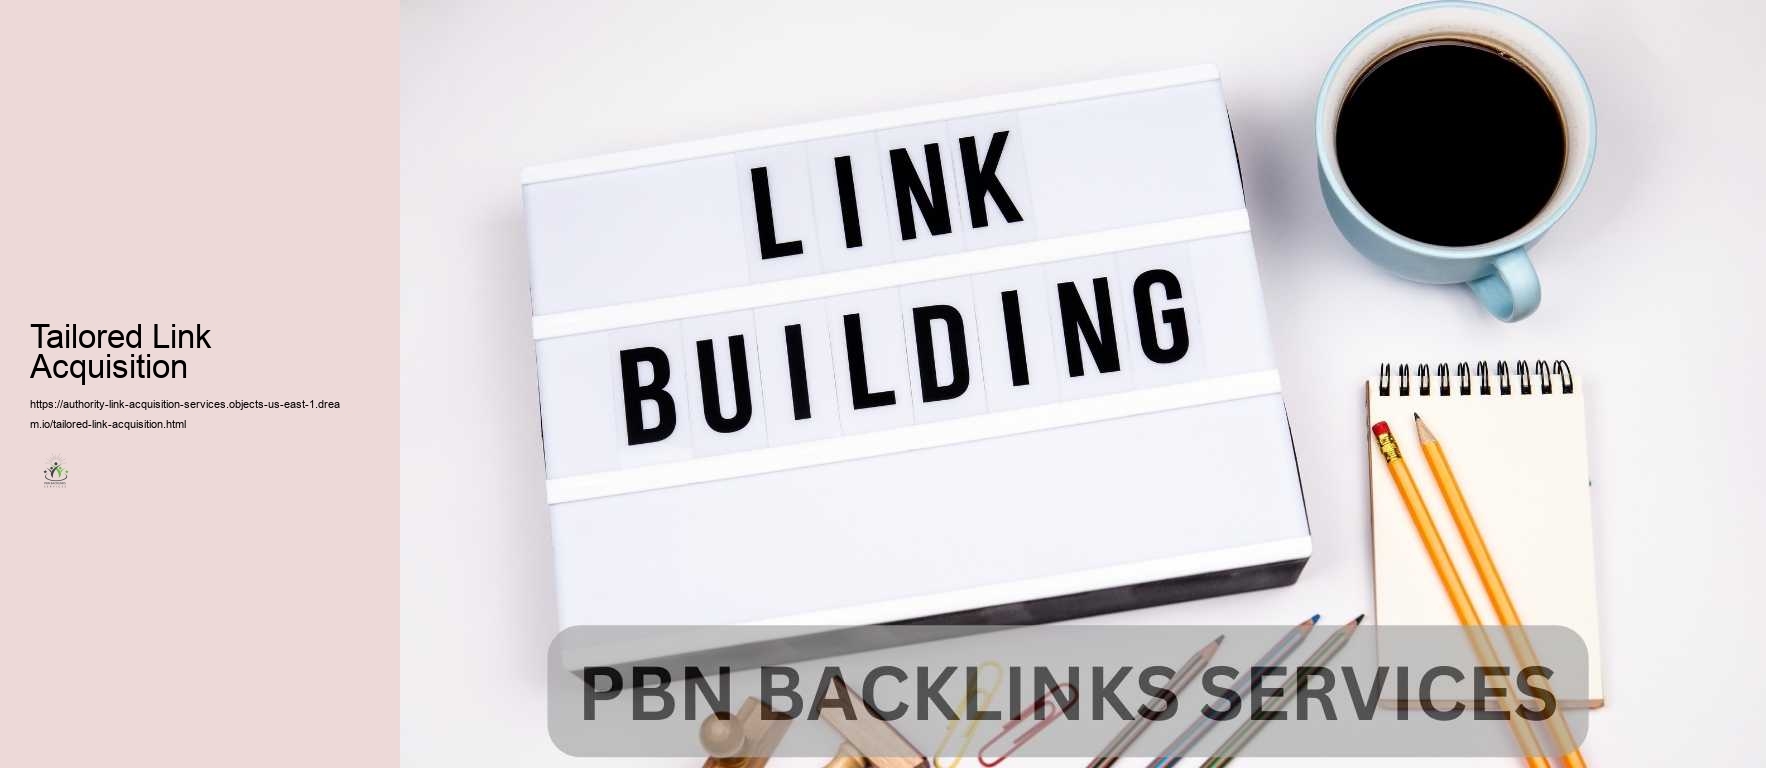 Tailored Link Acquisition